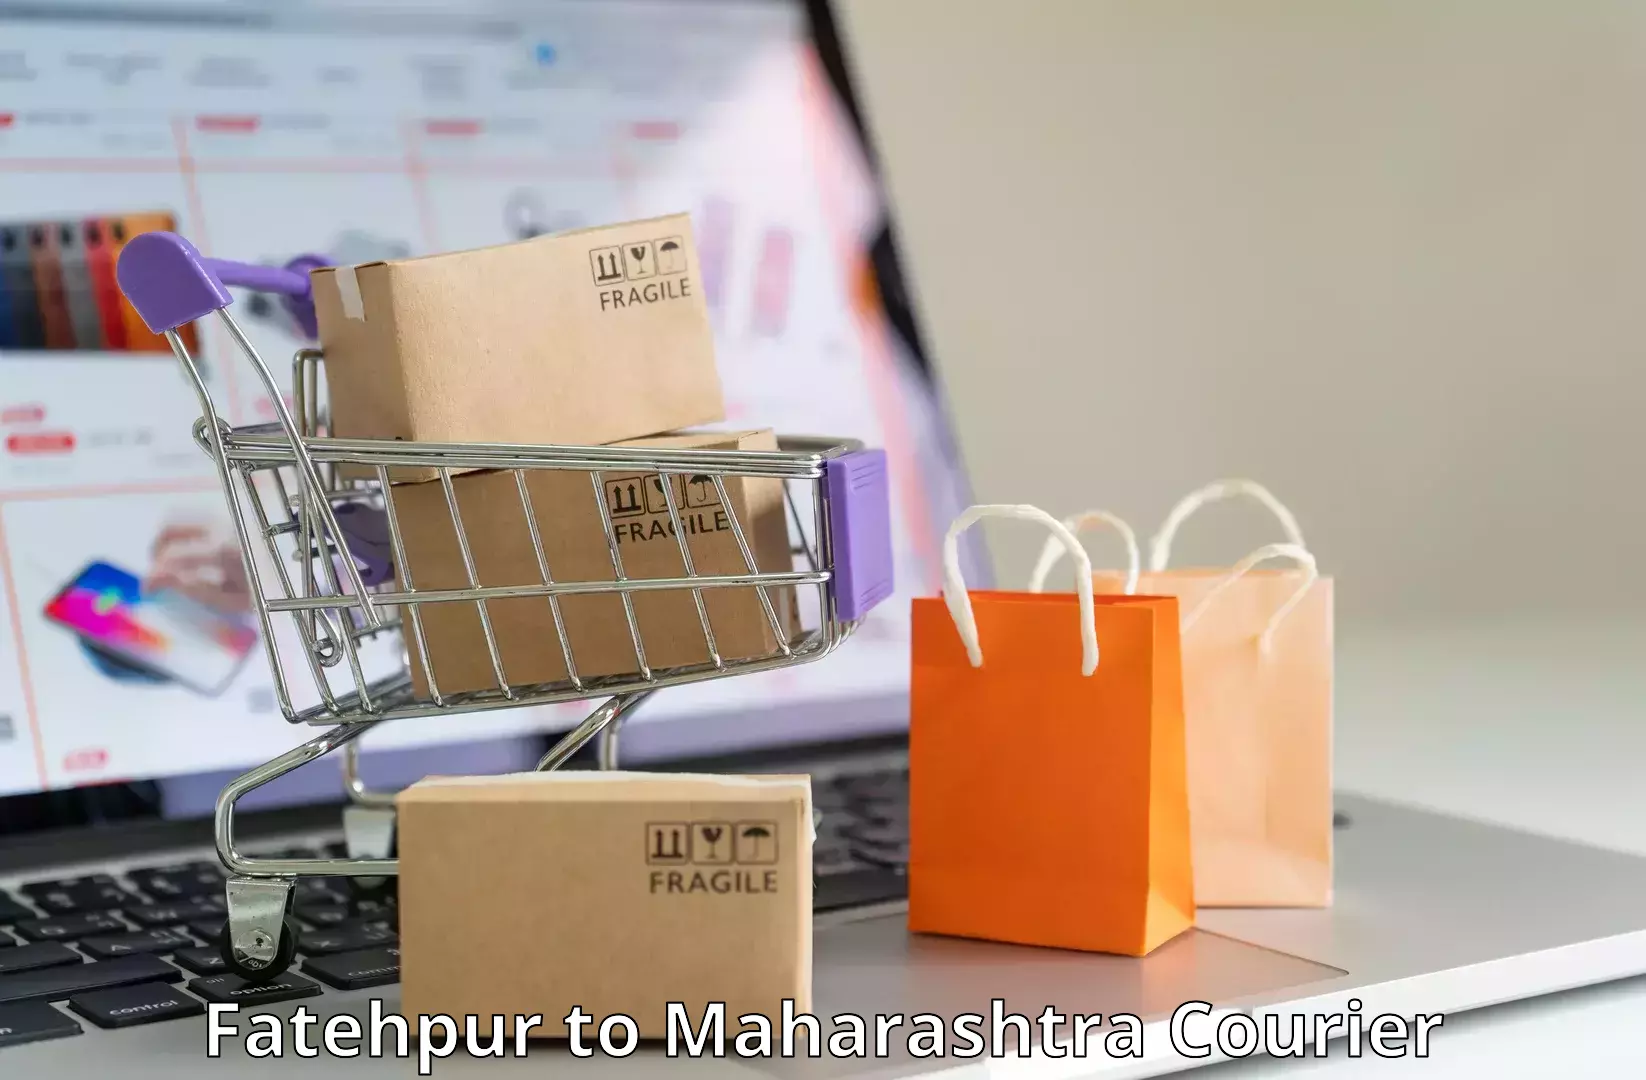 Courier service innovation Fatehpur to Worli